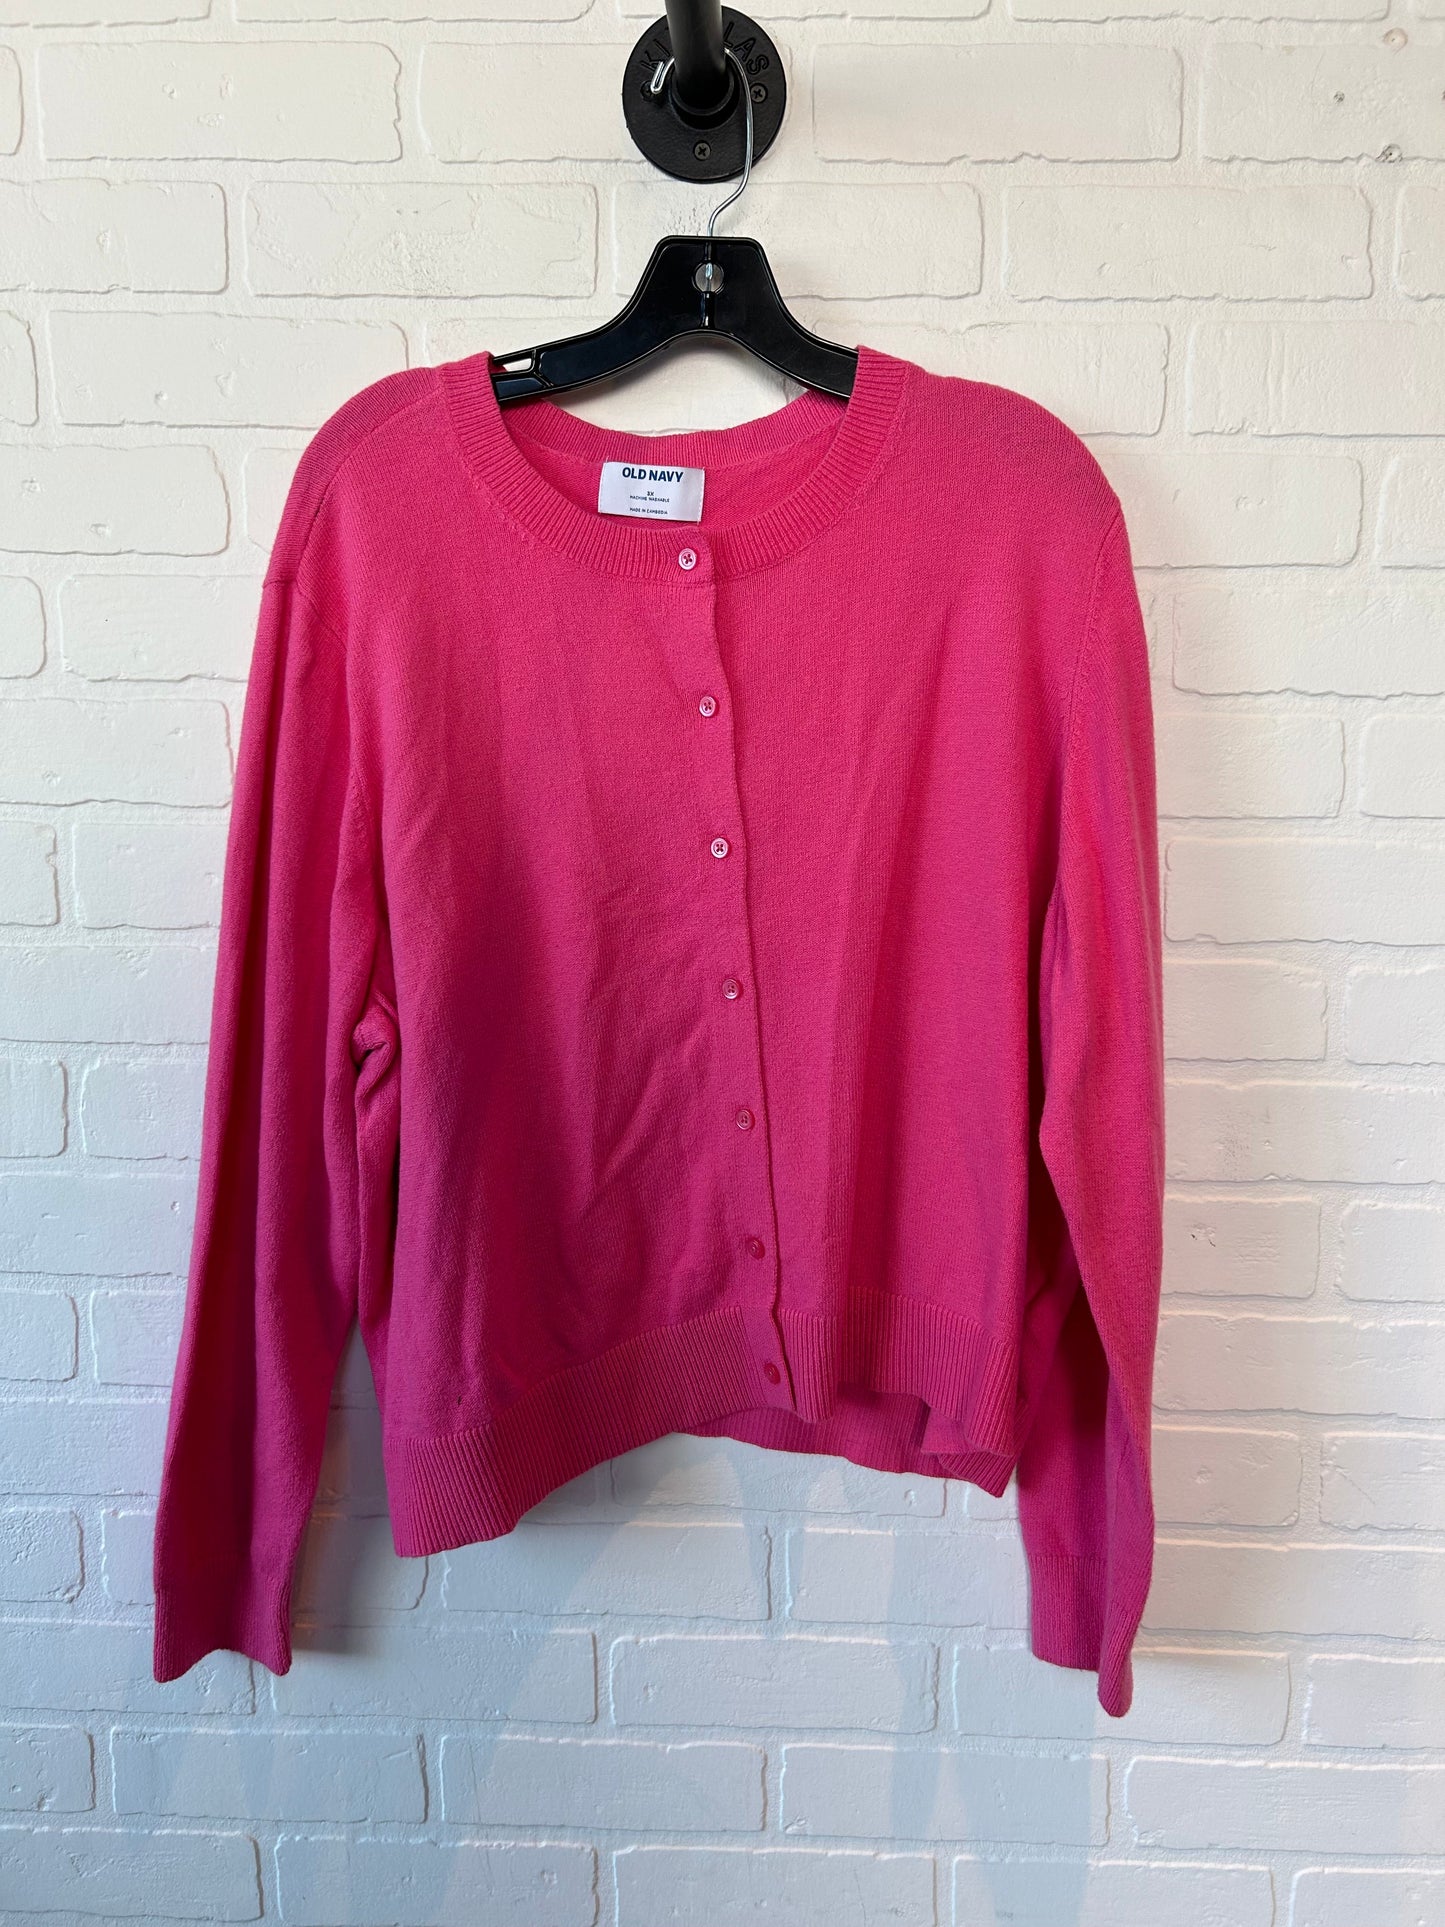 Pink Sweater Cardigan Old Navy, Size 3x